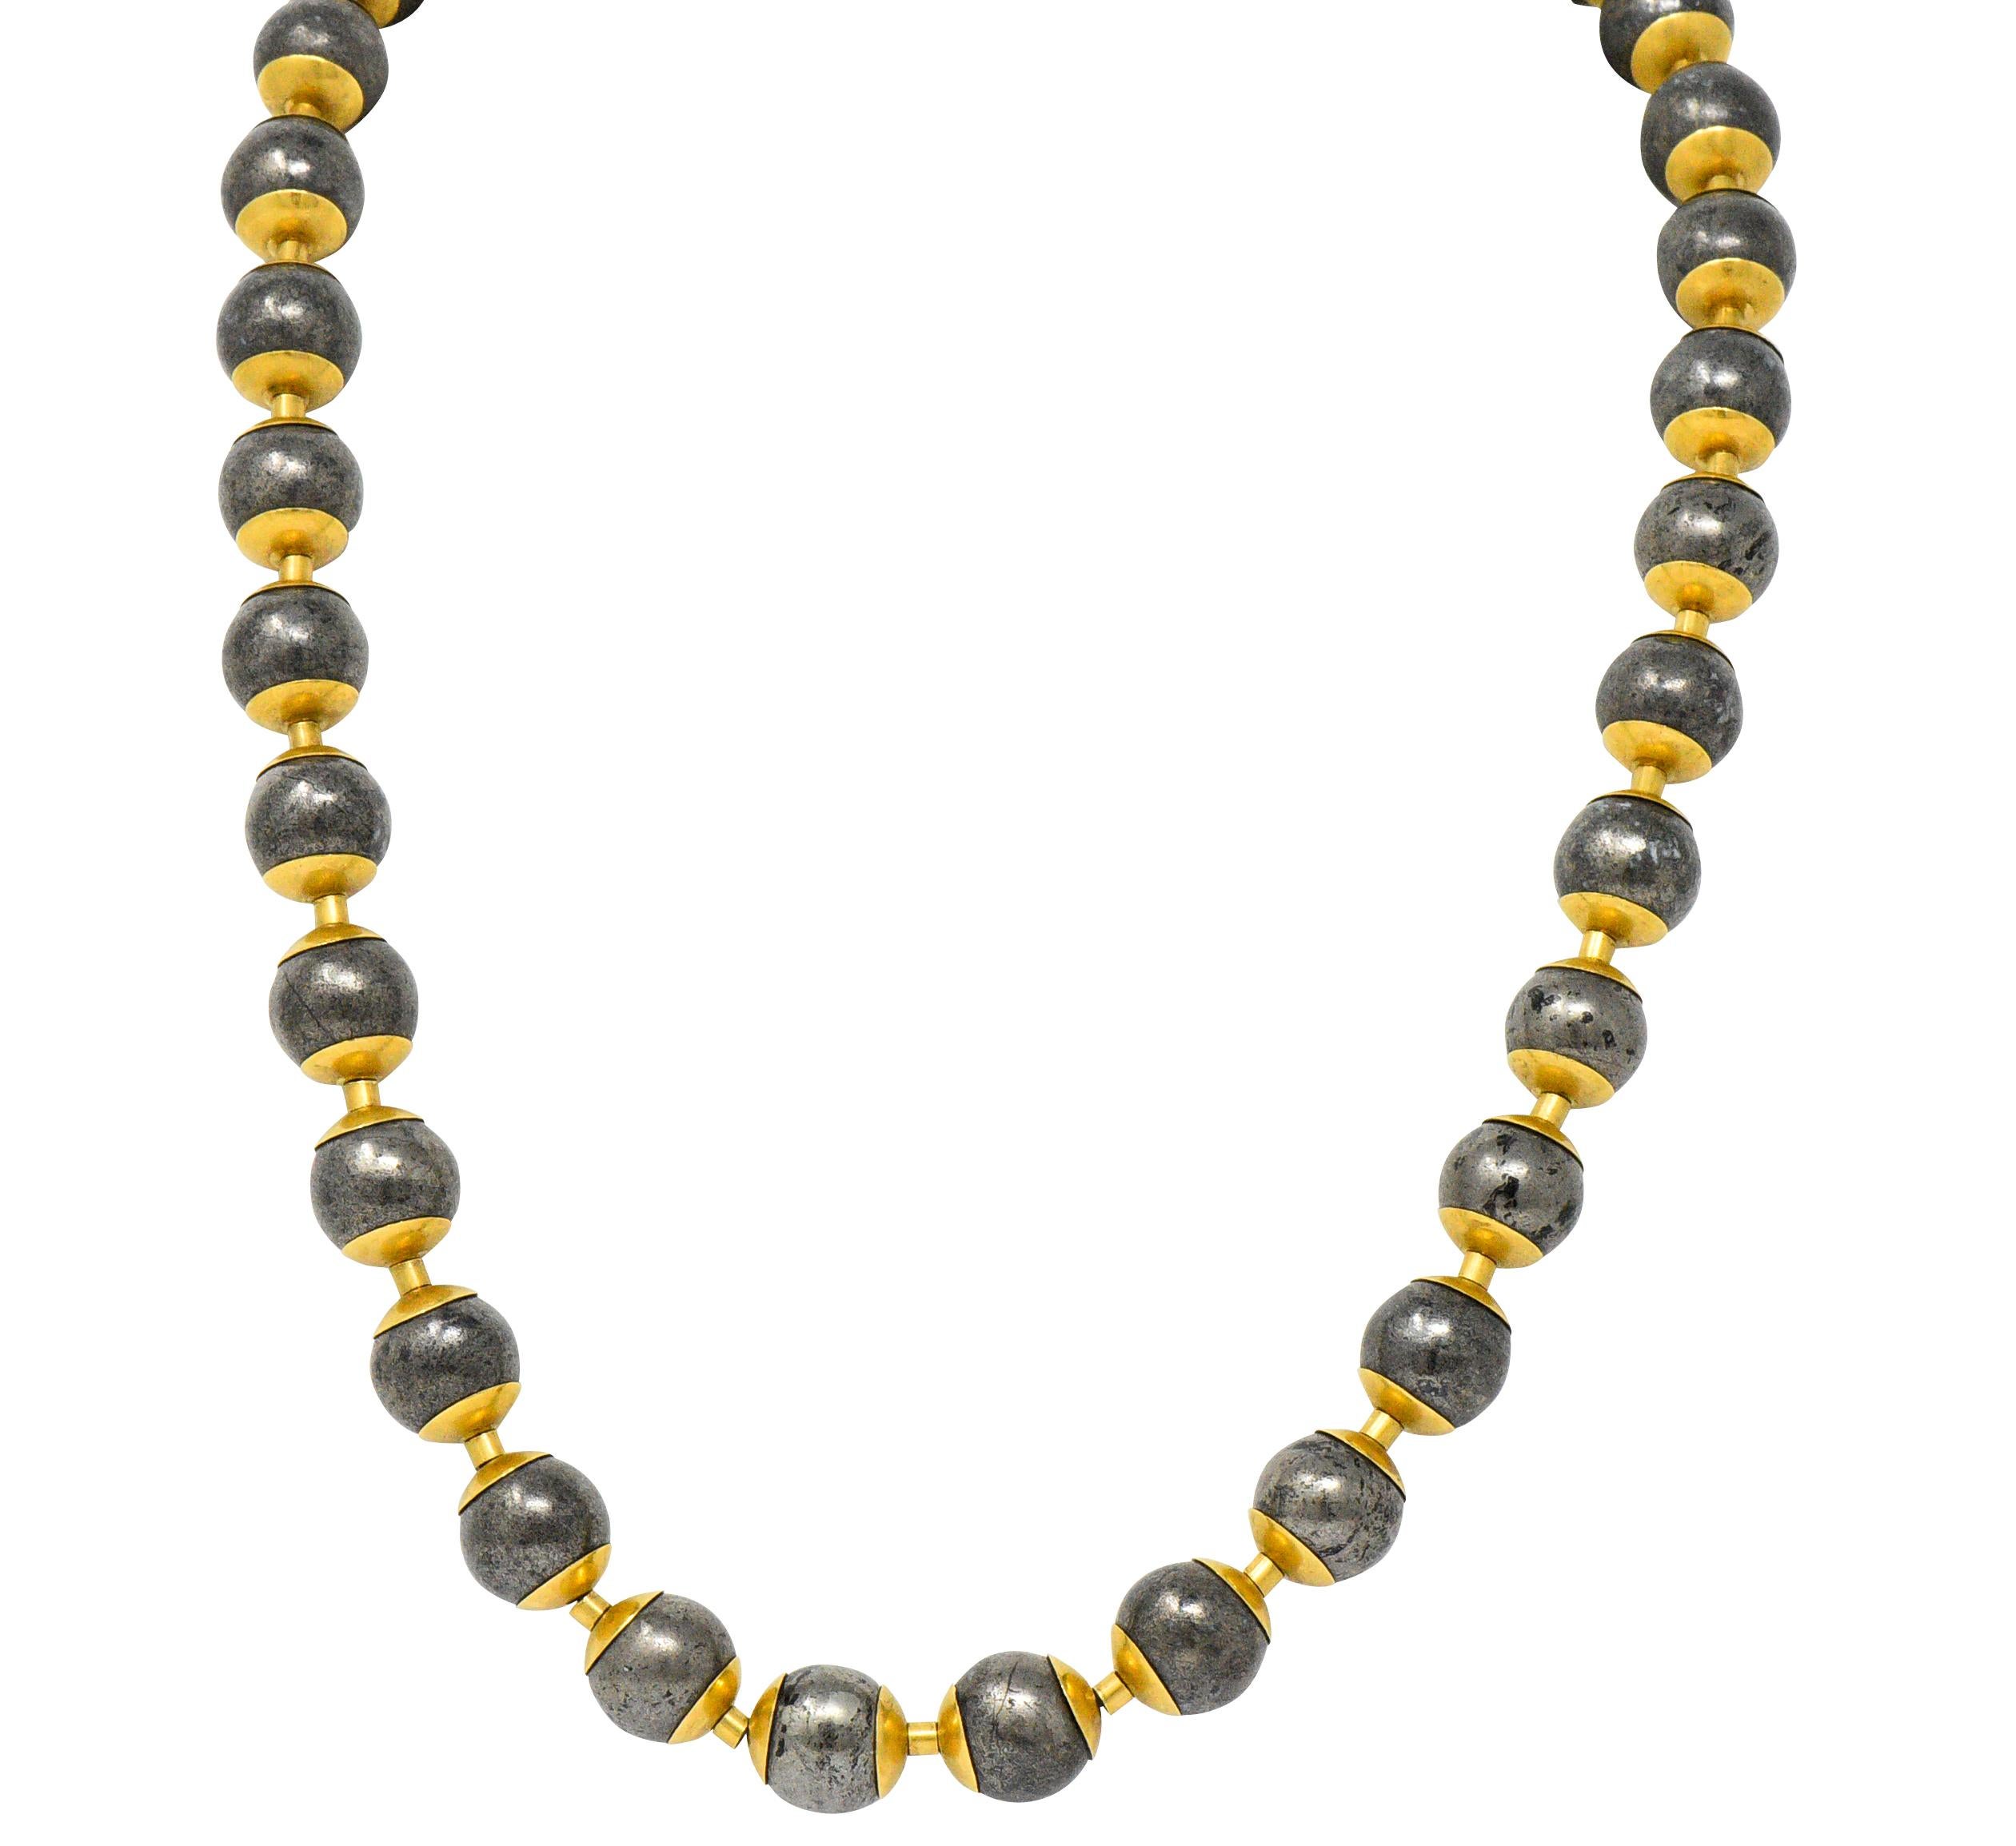 Link style necklace comprised of round metallic beads measuring approximately 11.6 to 12.4 mm

With excellent metallic luster and unique surface mottling

Each bead is framed by polished gold endcaps and separated by gold, barrel shaped, spacer